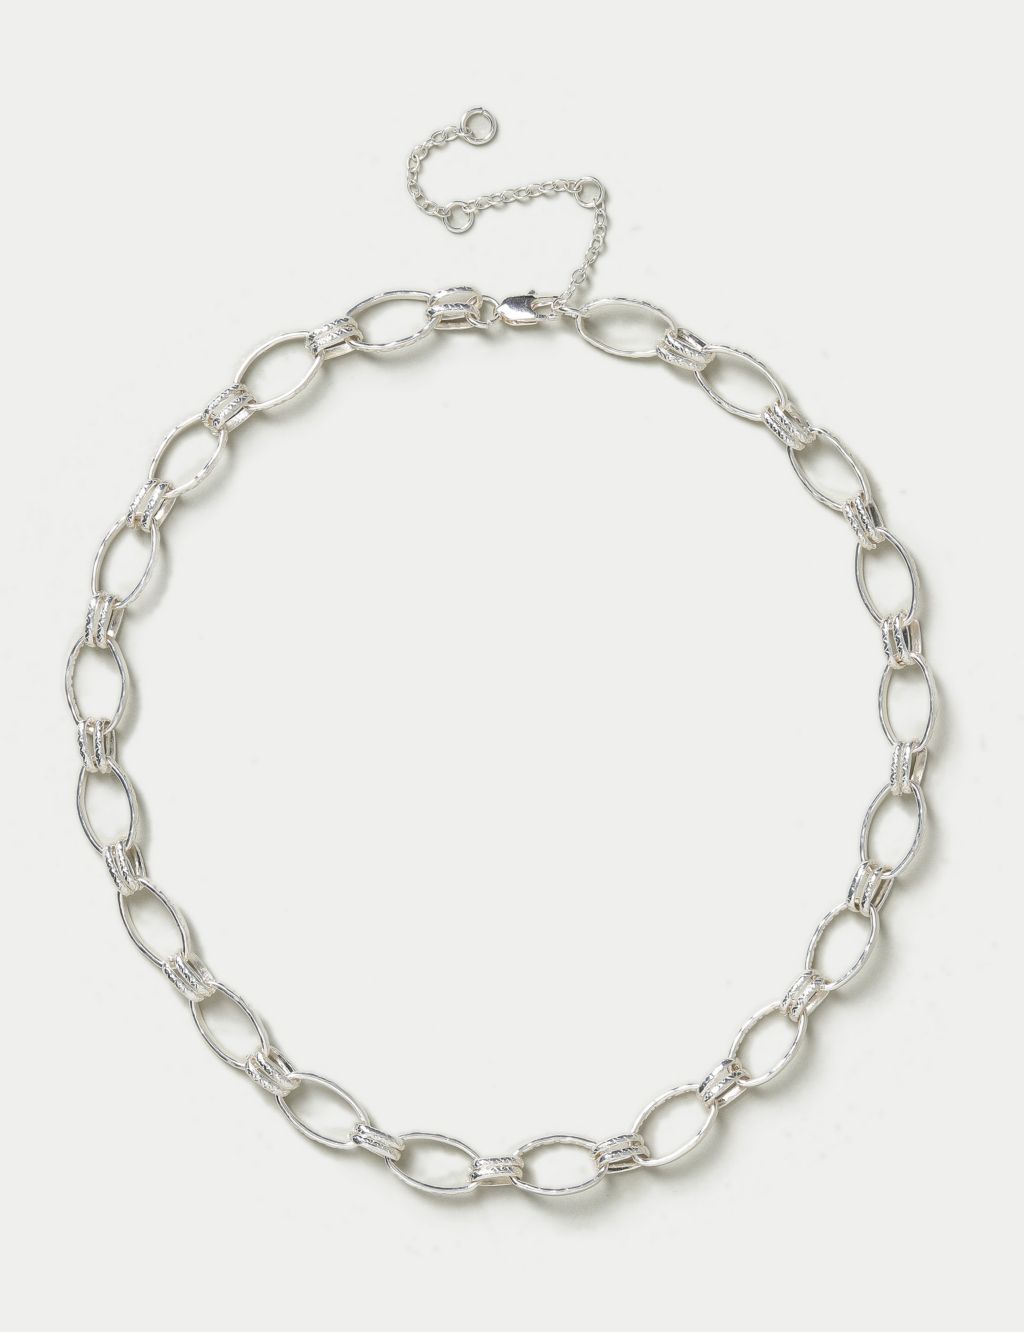 Silver Tone Beaten Link Chain Necklace image 1